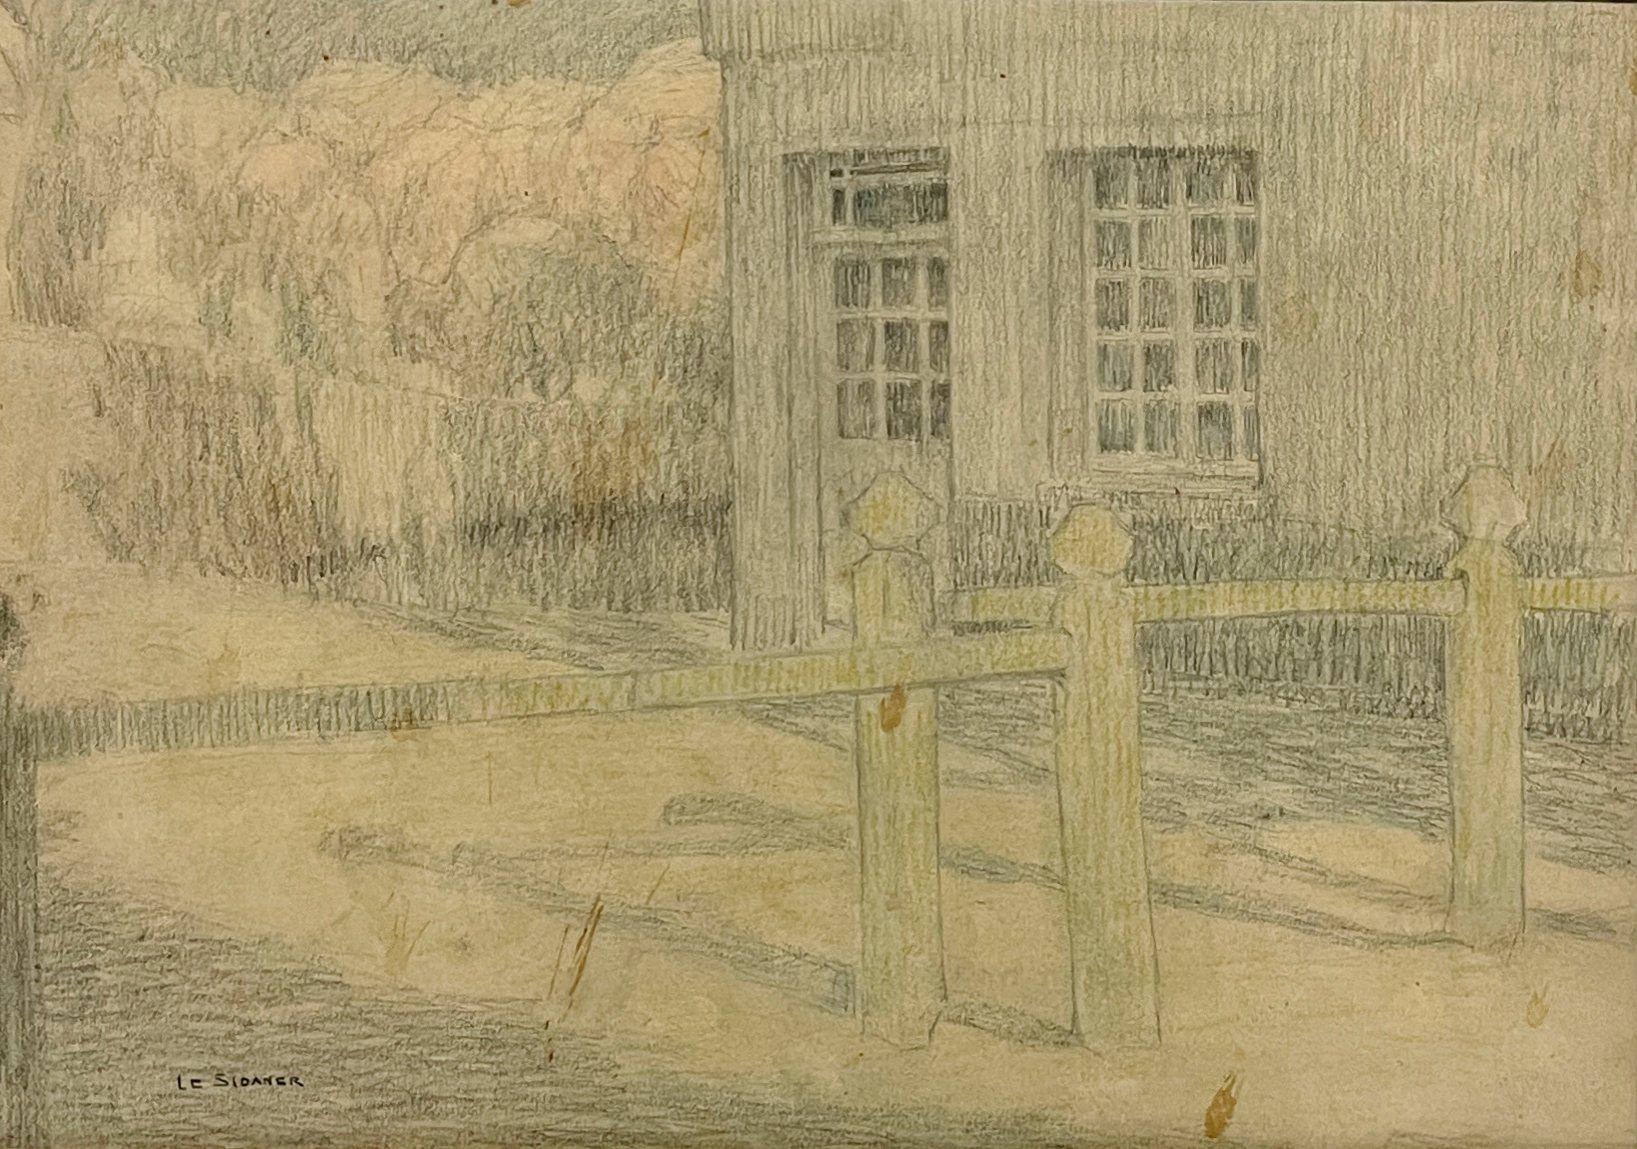 A graphite & colored pencil drawing of La Barrière, Gerberoy, by important Post-Impressionist painter Henri Le Sidaner, titled "La Barrière, Gerberoy".  Drawing accompanied with a certificate signed by Yann Farinaux-LeSidaner.  Provenance:  Louis et